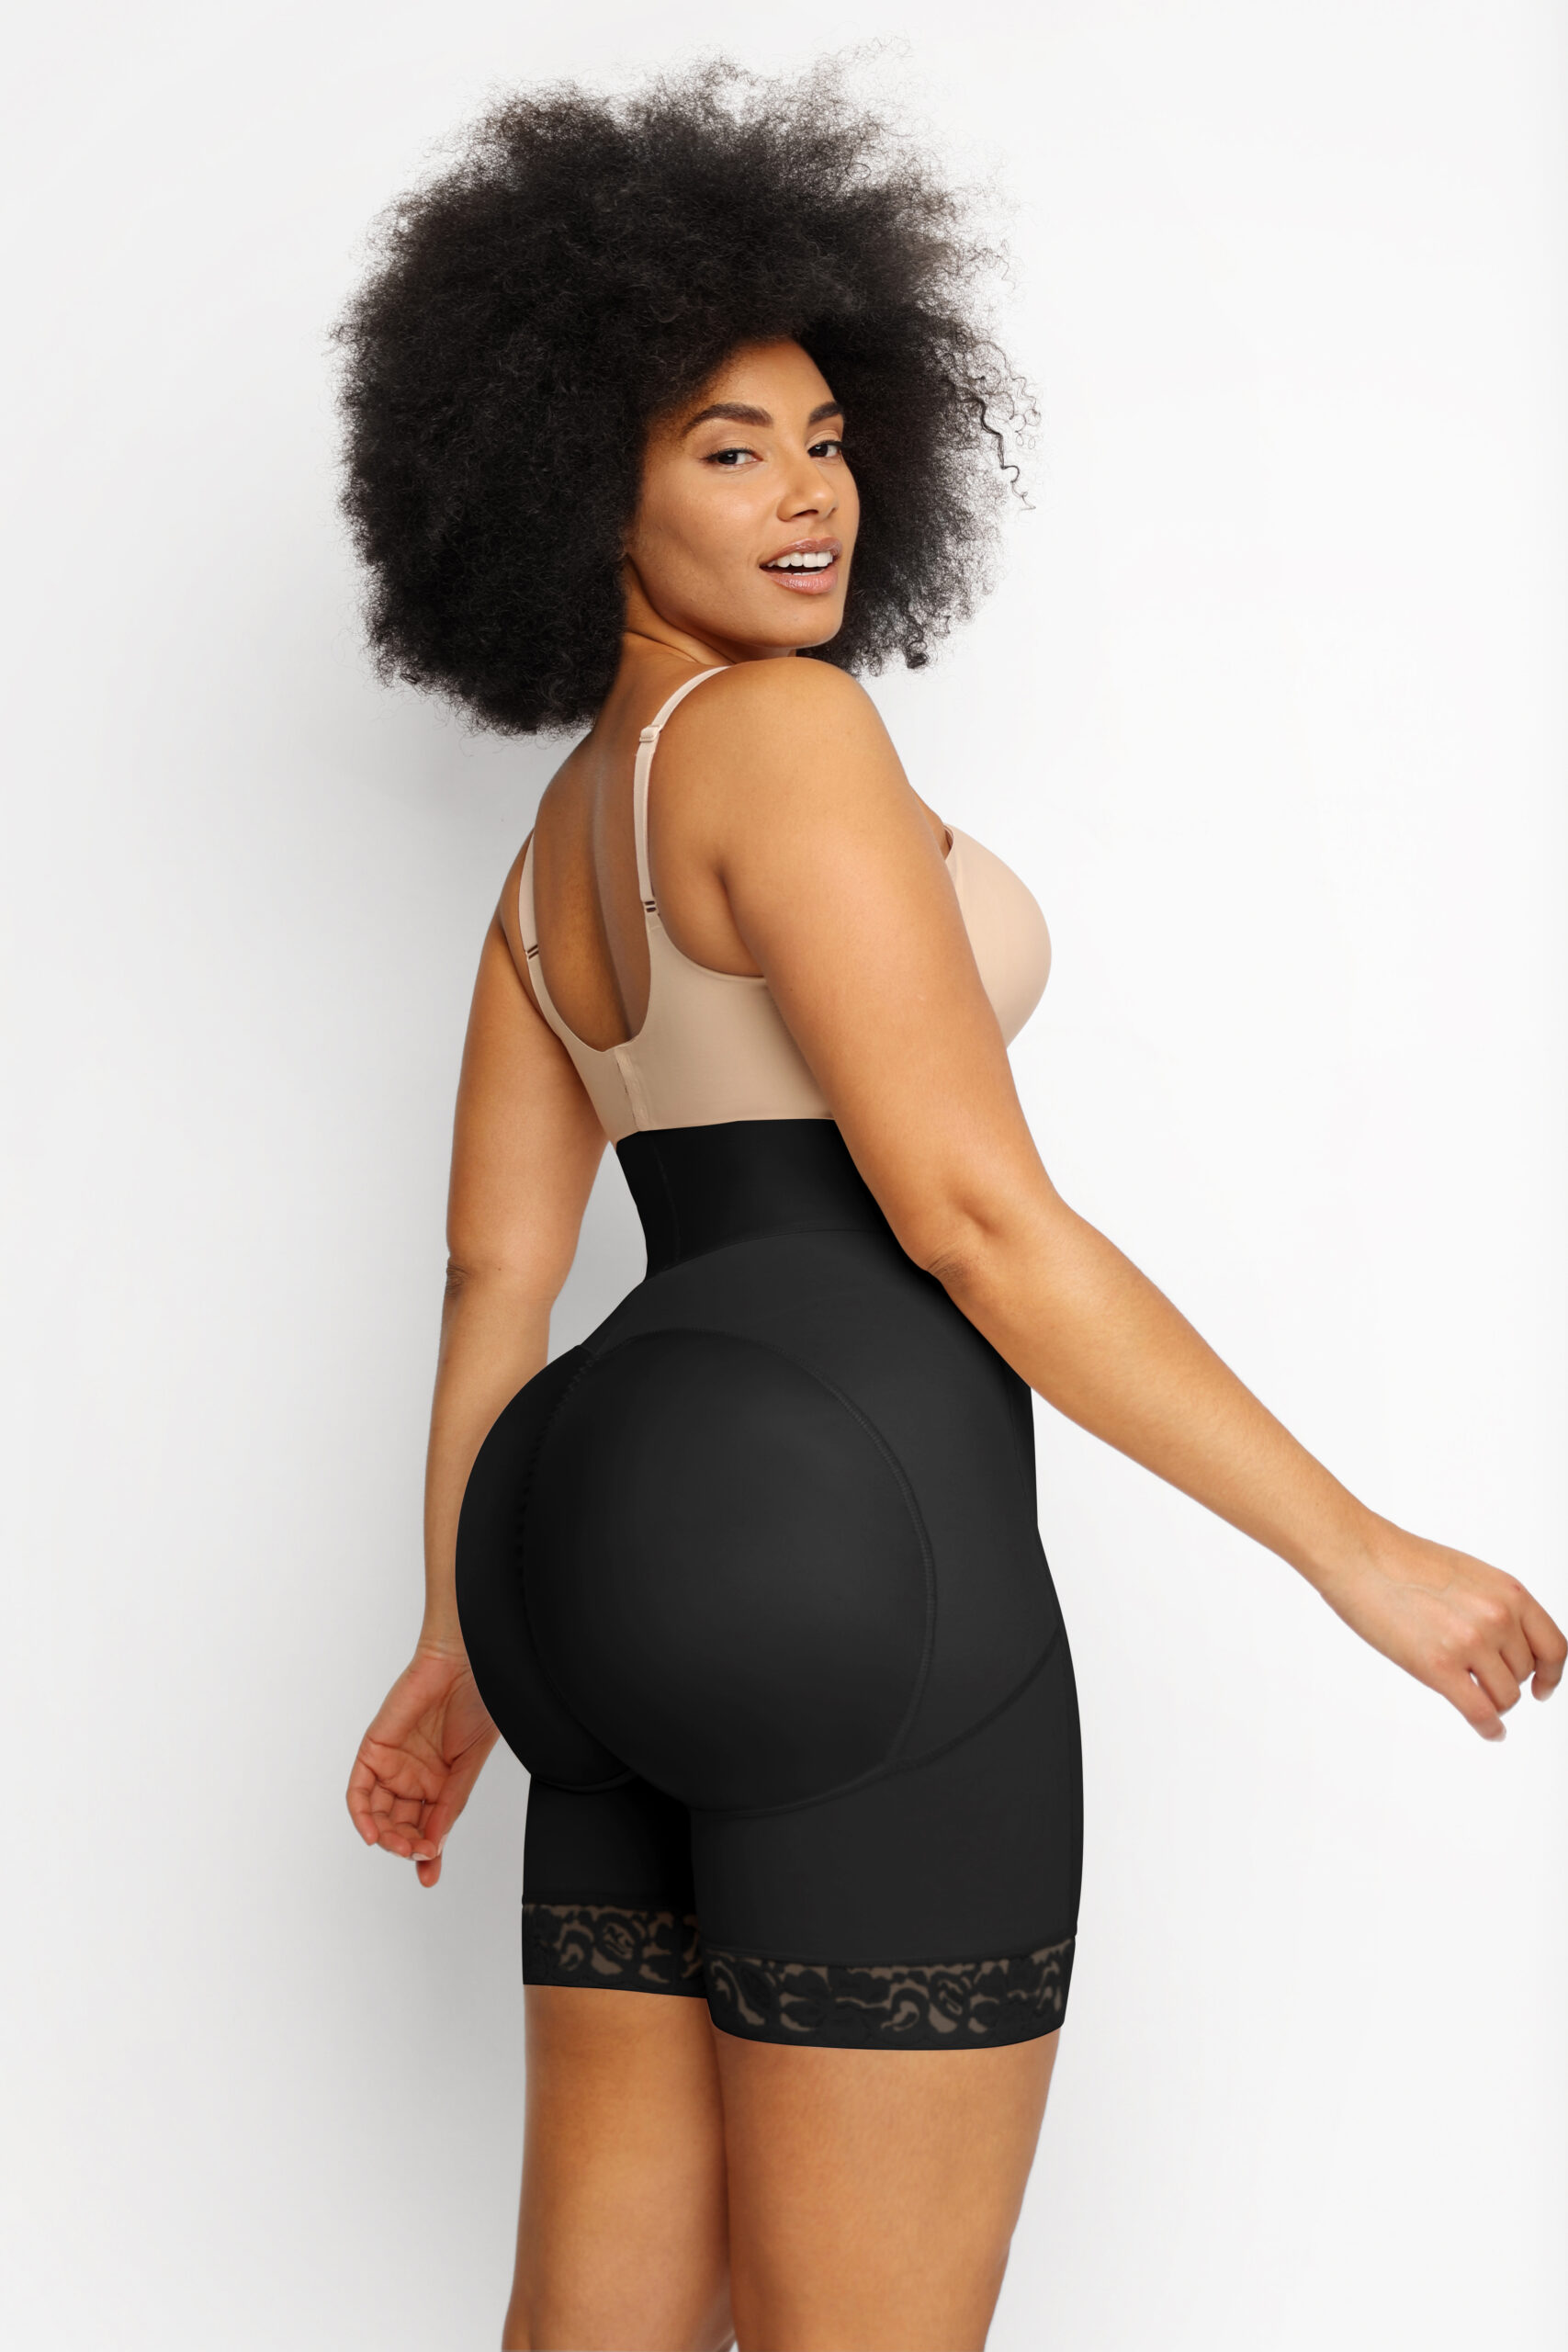 It's National Shapewear Day 💋 - Drop the Walls Boutique